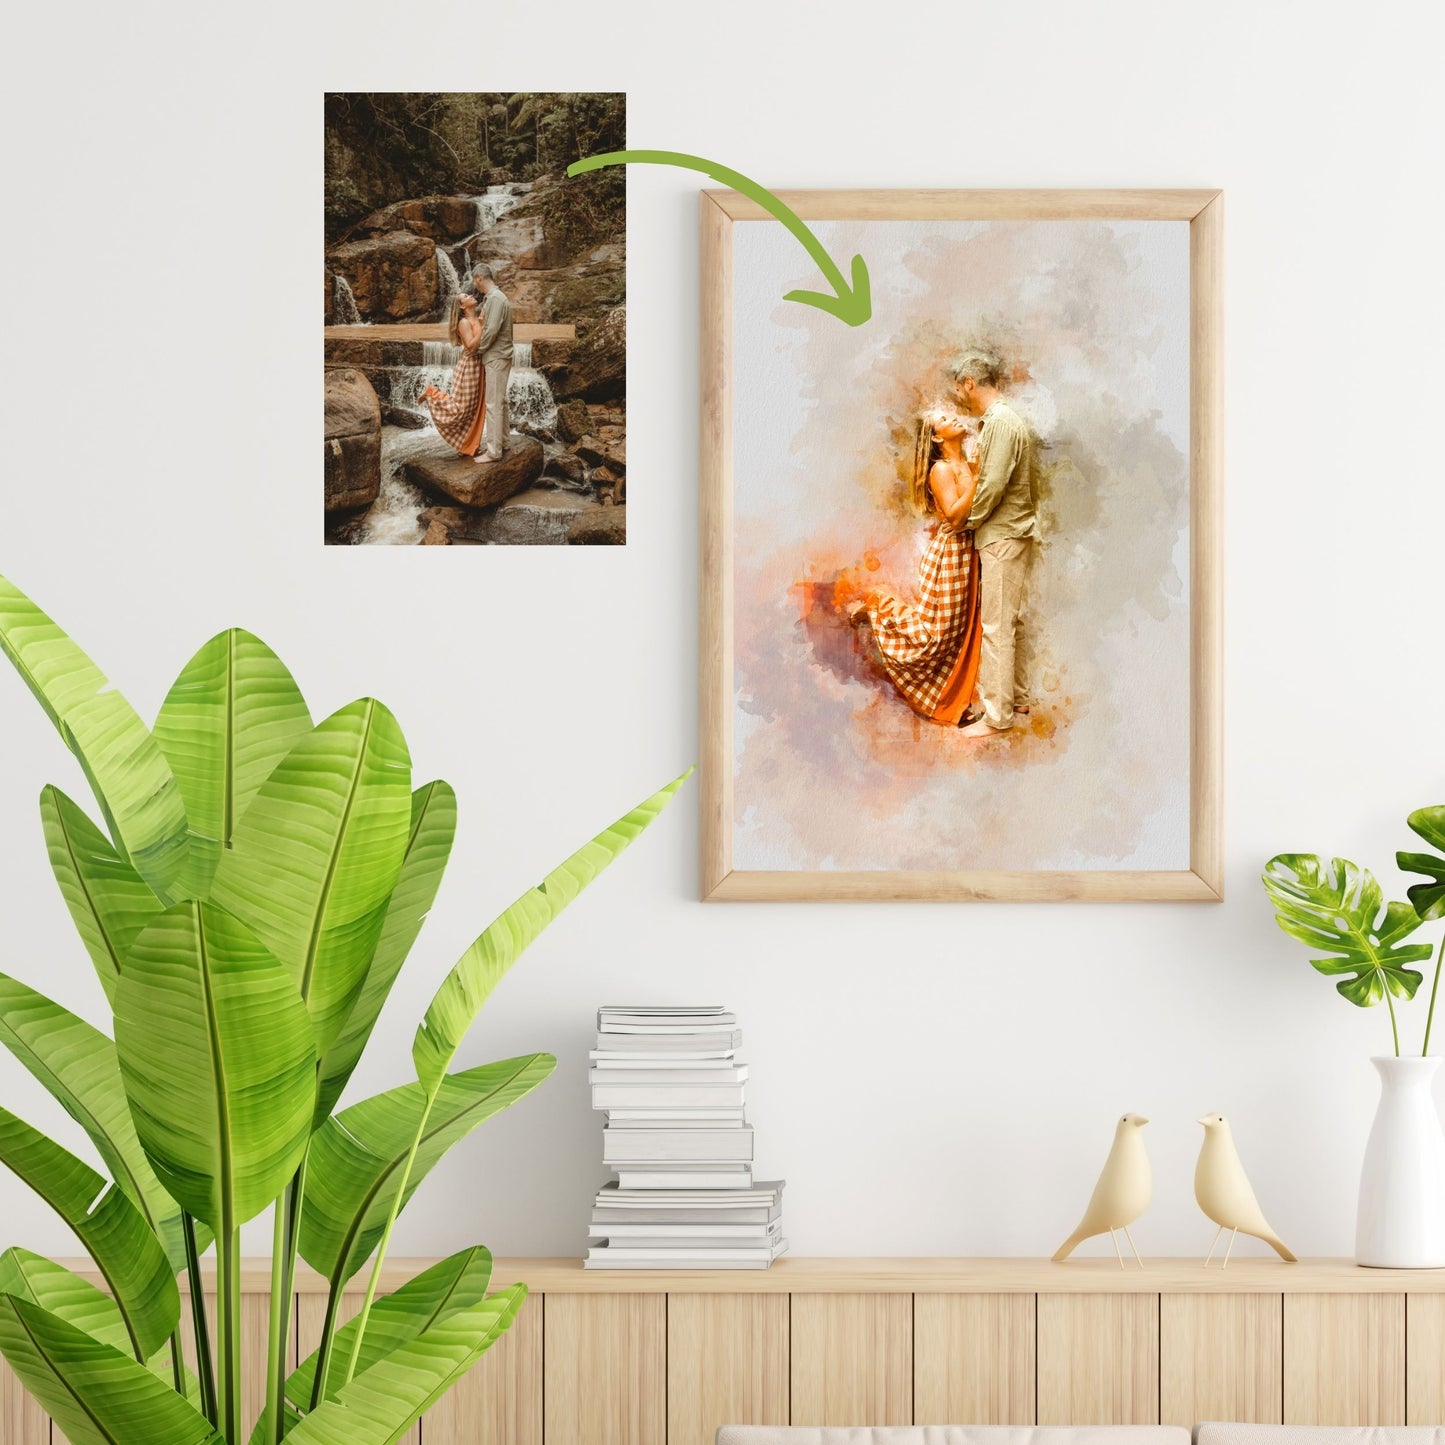 Beautiful watercolor painting from photo, ideal for family memories.